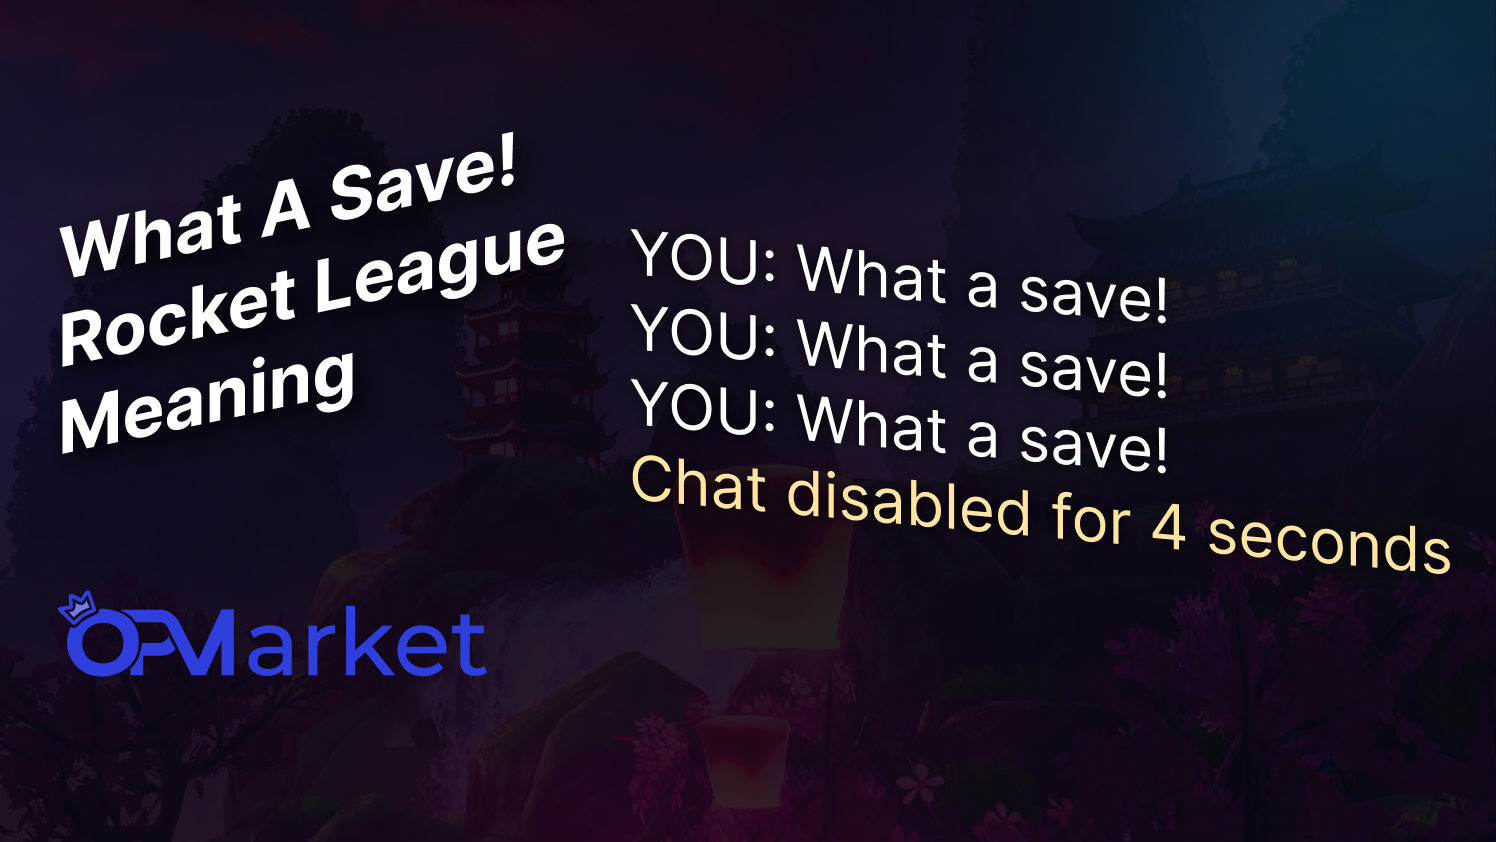 What A Save Rocket League Meaning